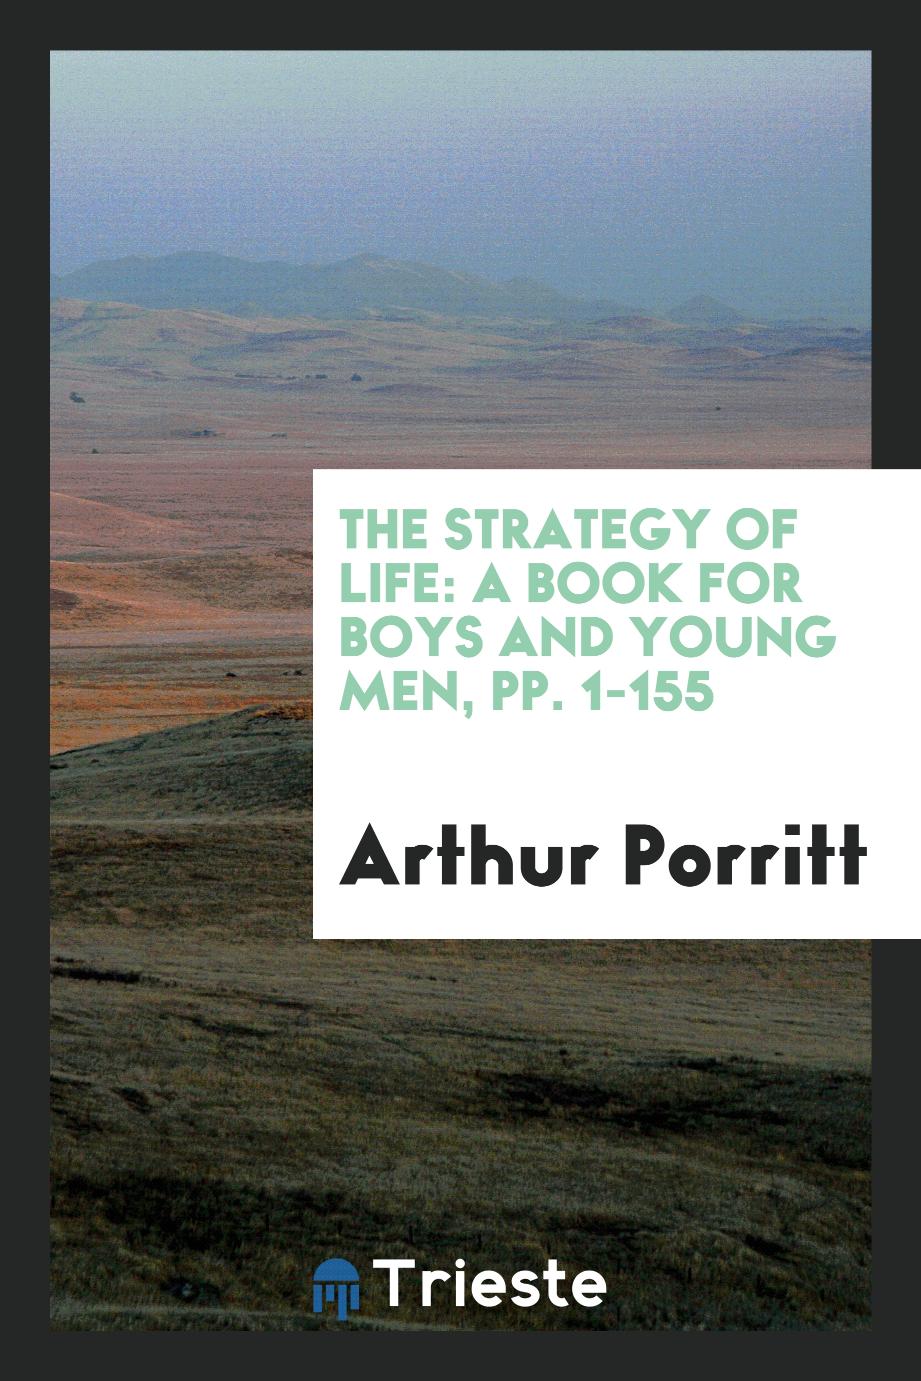 The Strategy of Life: A Book for Boys and Young Men, pp. 1-155